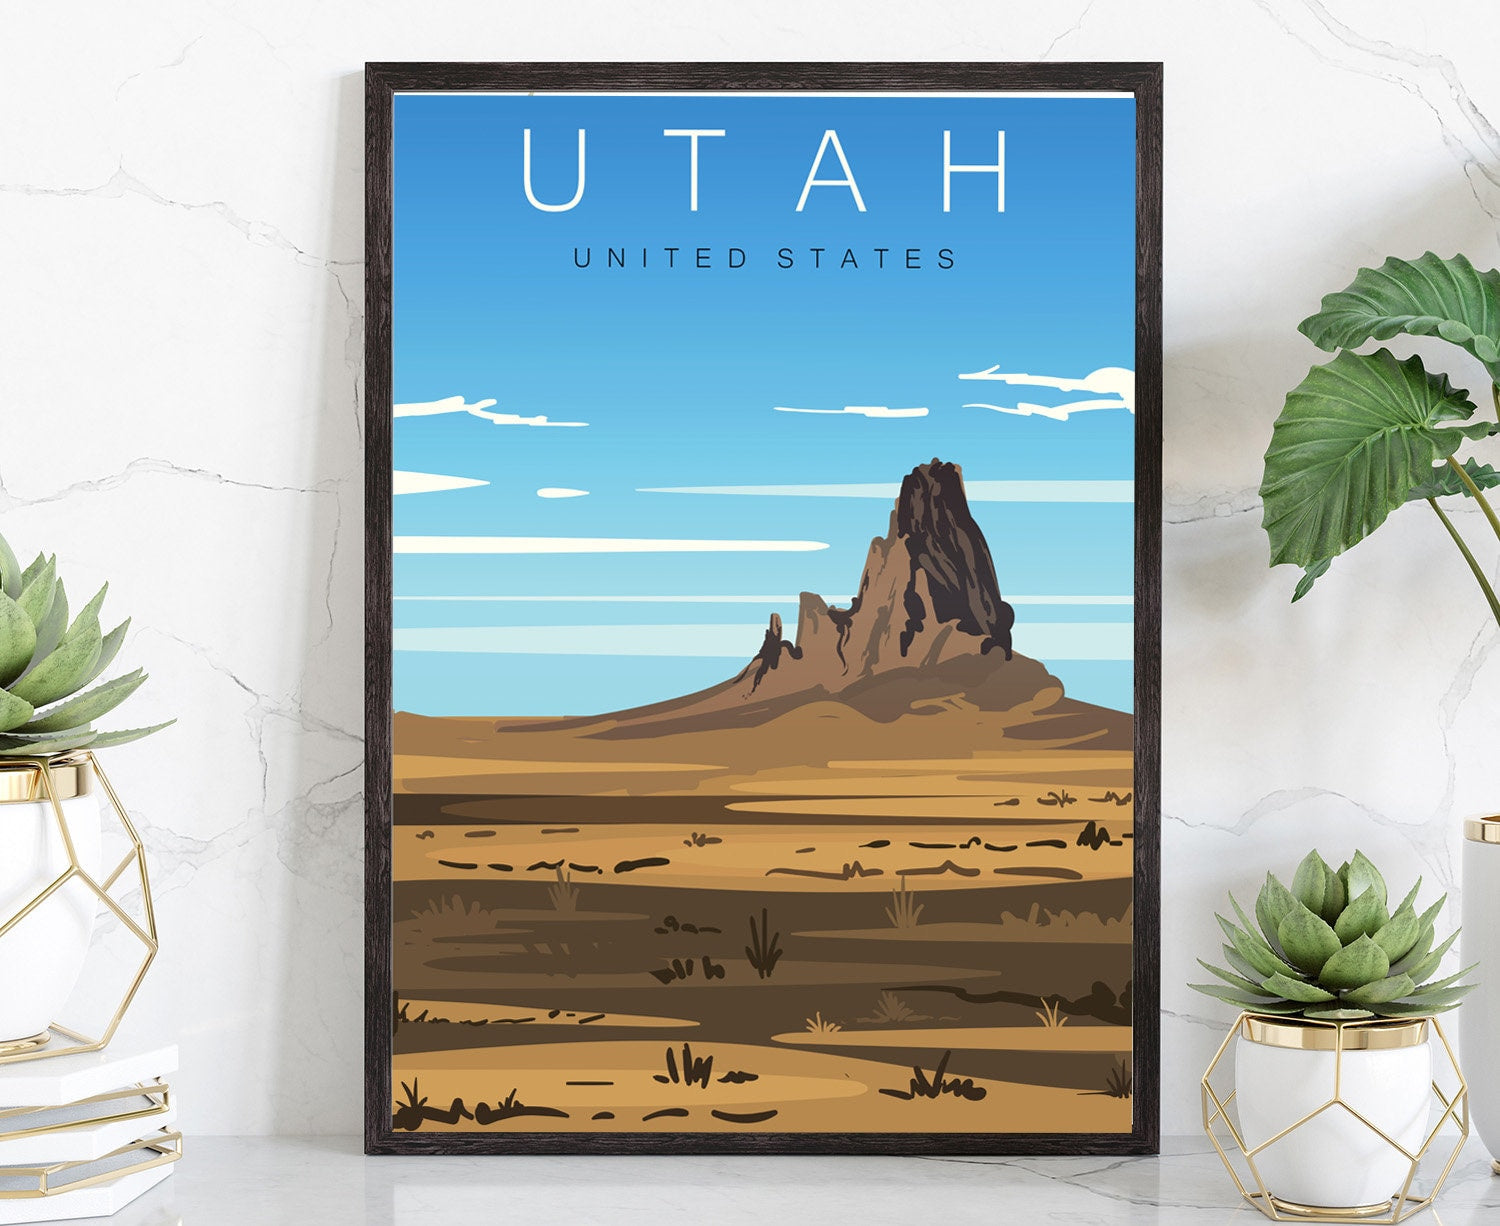 Retro Style Travel Poster, Utah Vintage Rustic Poster Print, Home Wall Art, Office Wall Decor, Poster Prints, Utah State Map Poster